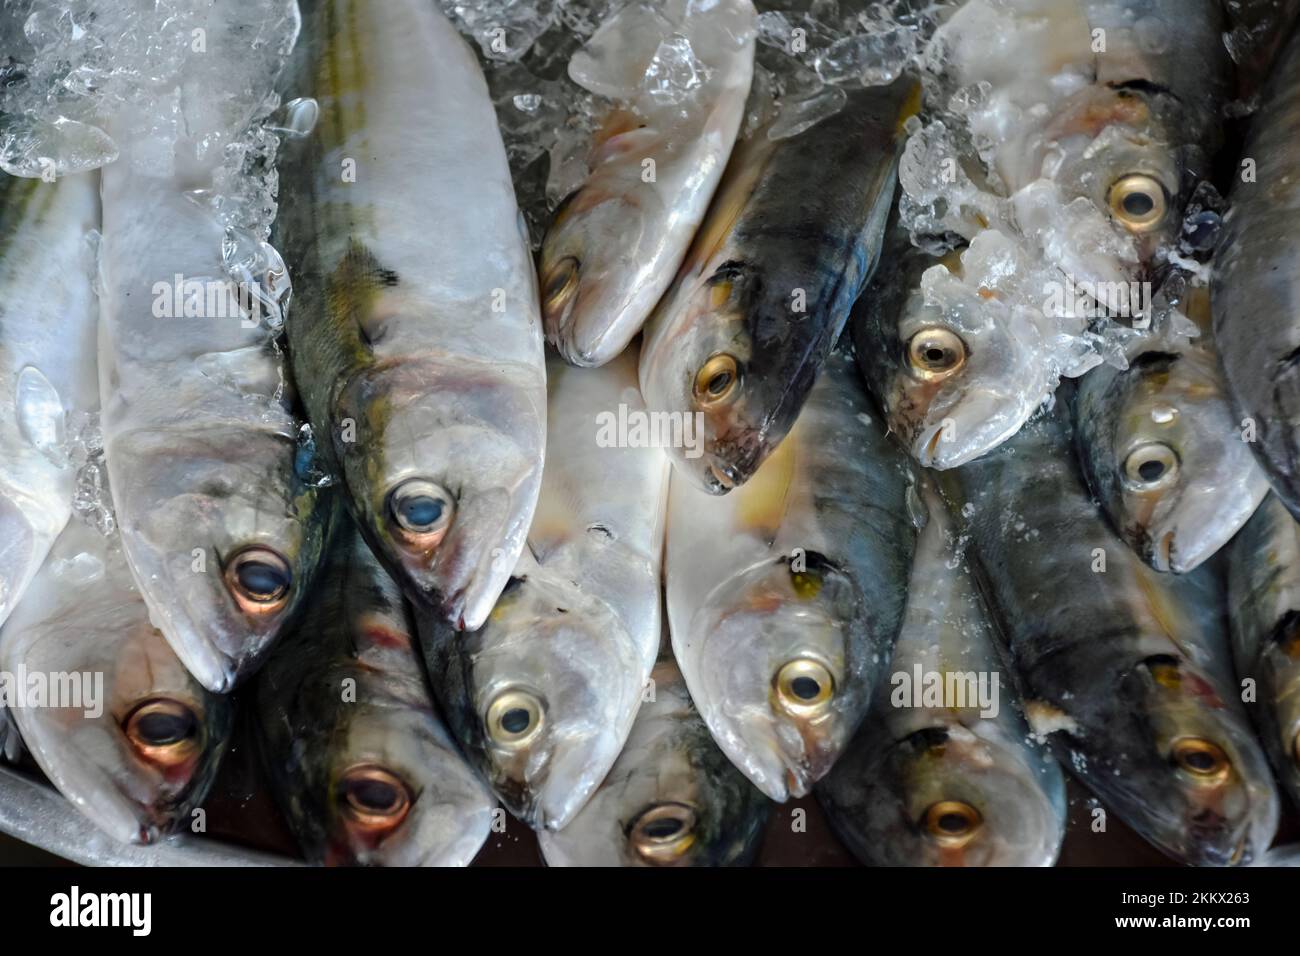 Near view of a dish full of frish small fishes to sell on a market stand Stock Photo